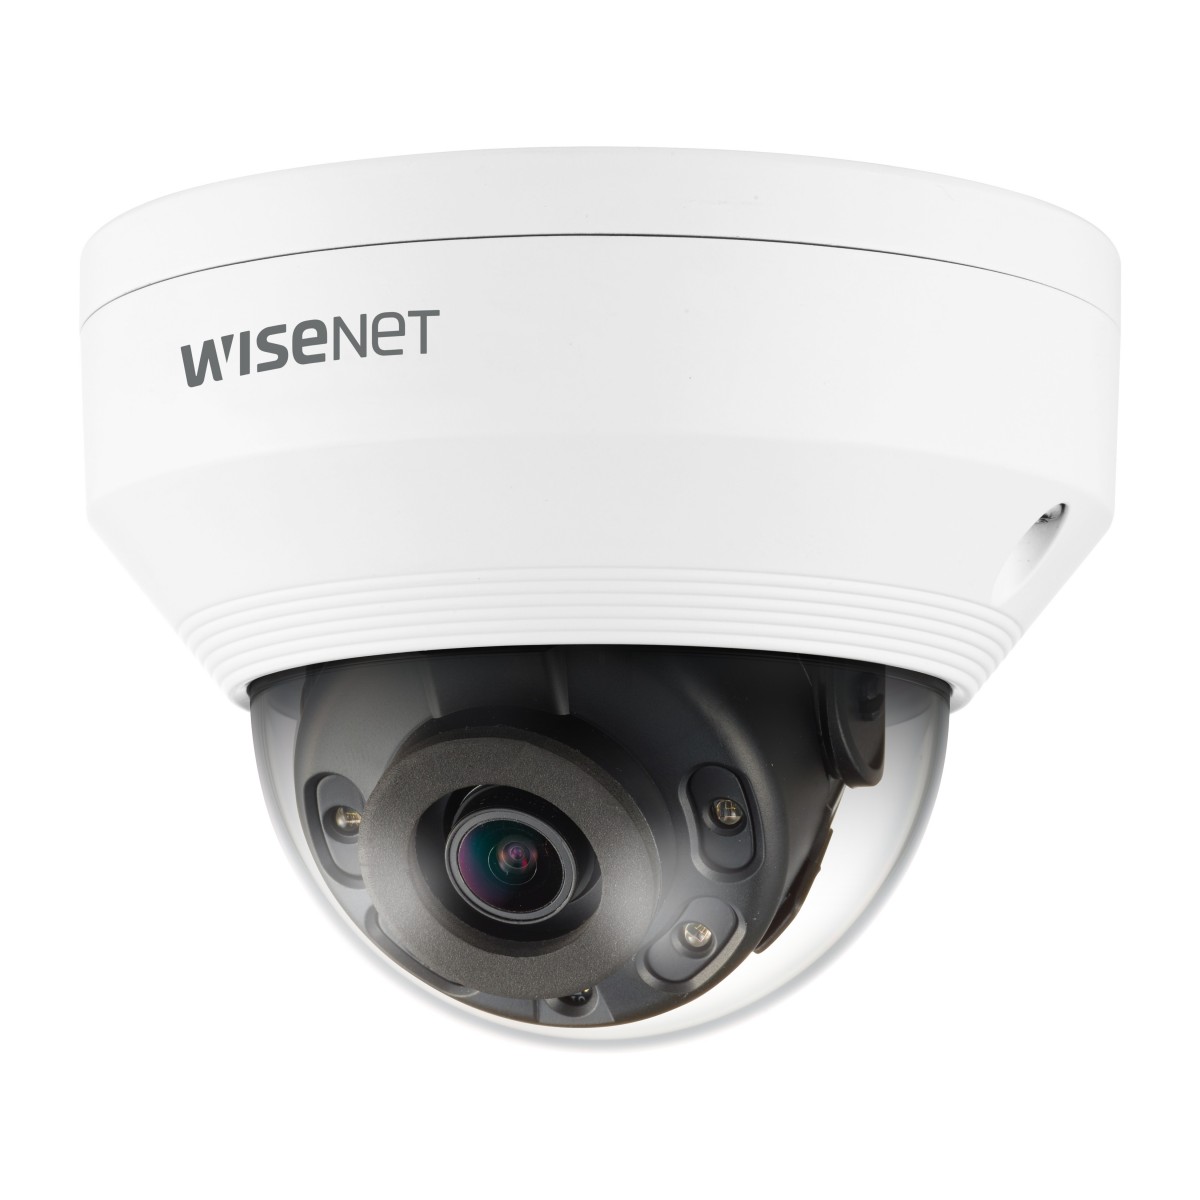 Hanwha Techwin Hanwha QNV-8010R - IP security camera - Outdoor - Wired - Simplified Chinese - Traditional Chinese - Czech - Germ